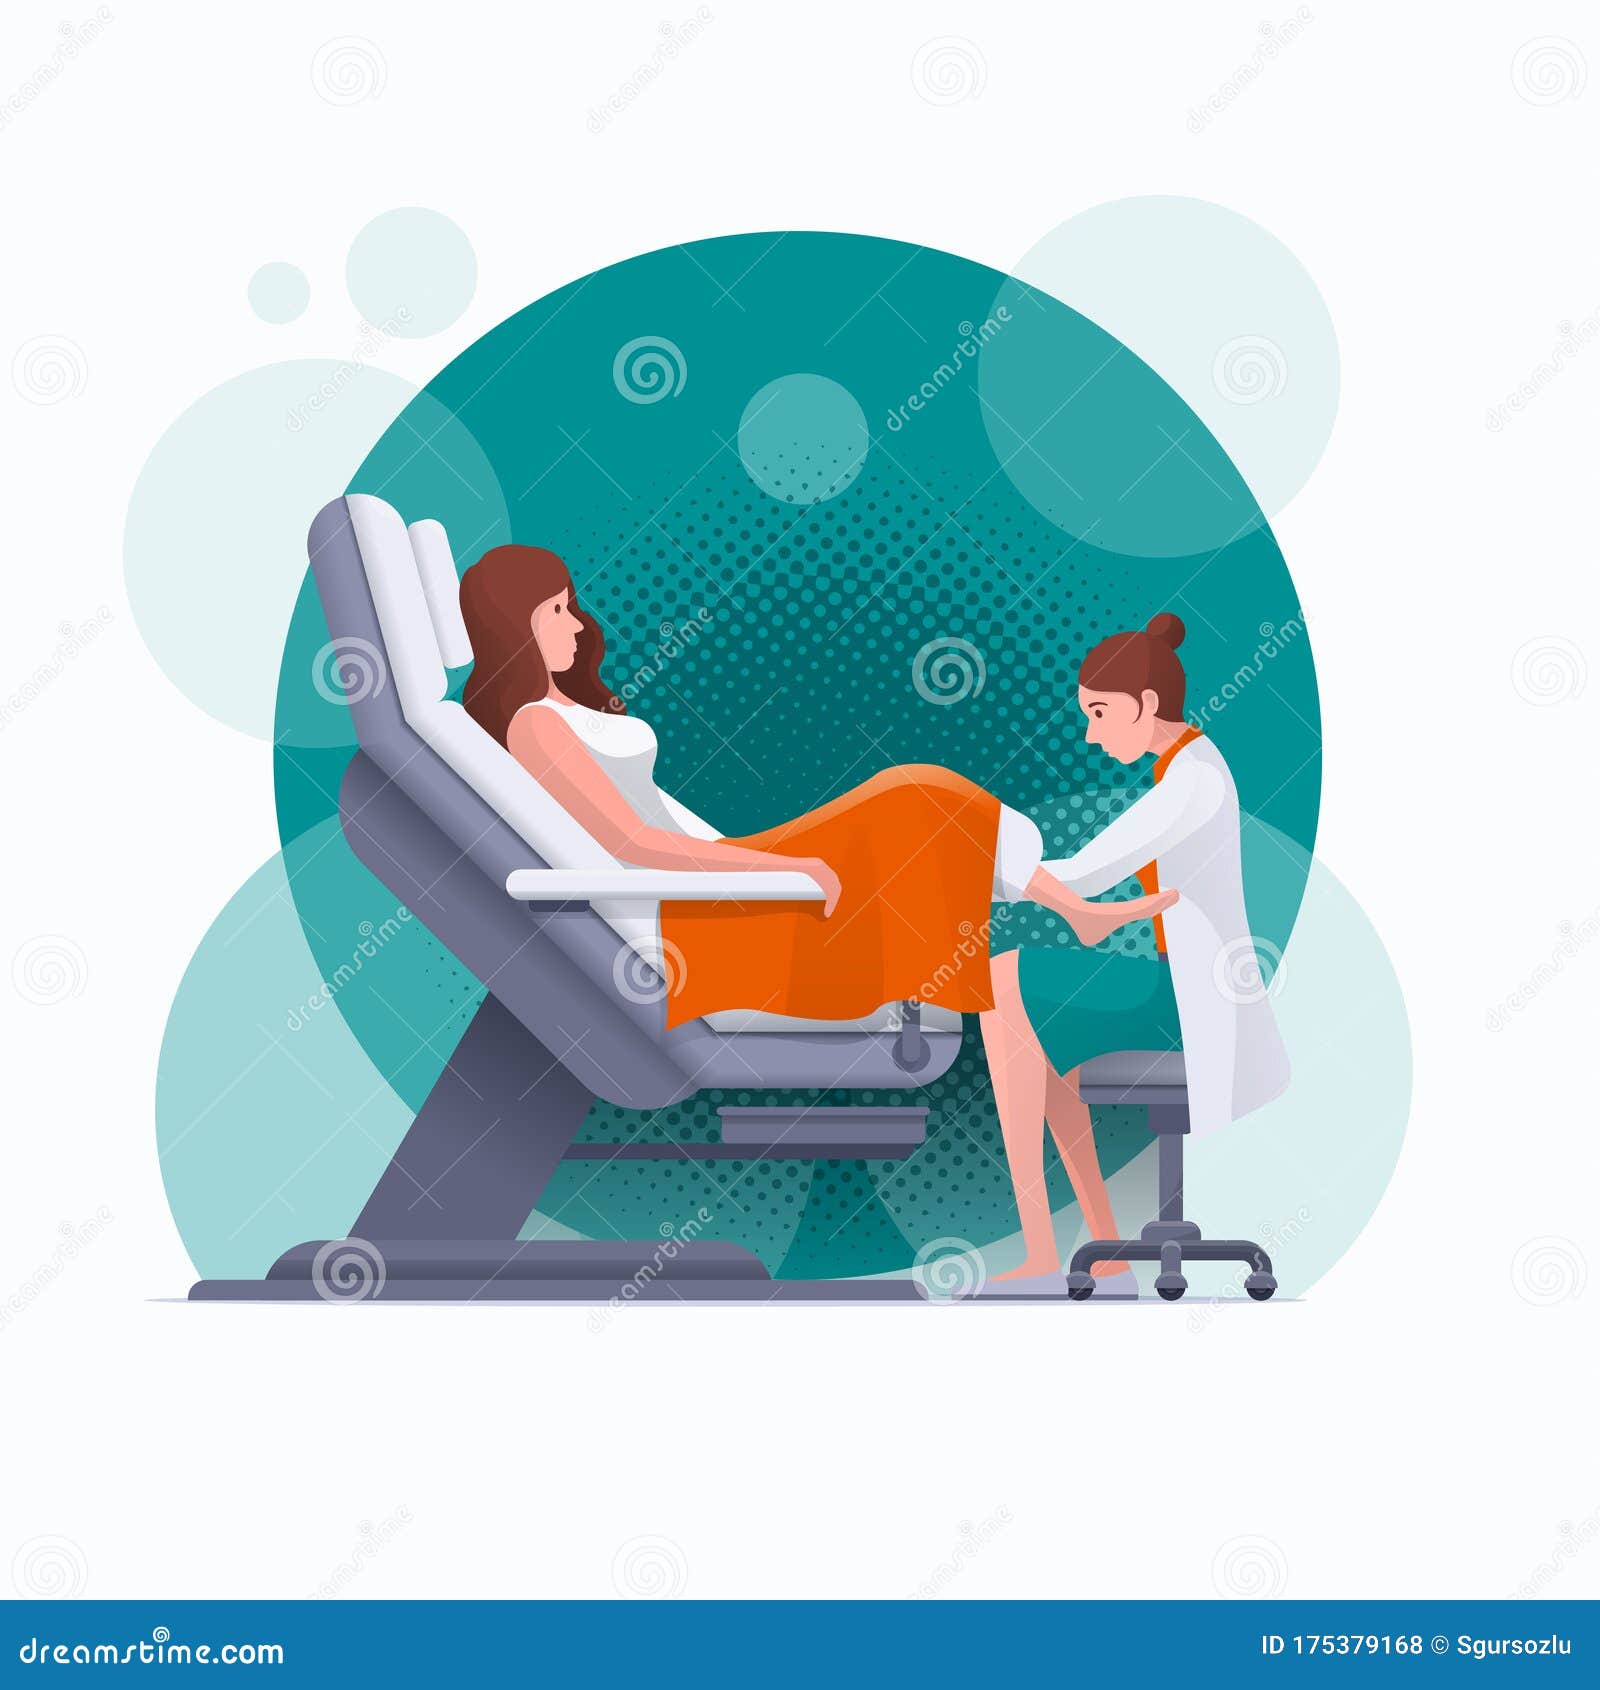 young pregnant woman or woman is lying in gynecological examination chair during gynecological exam